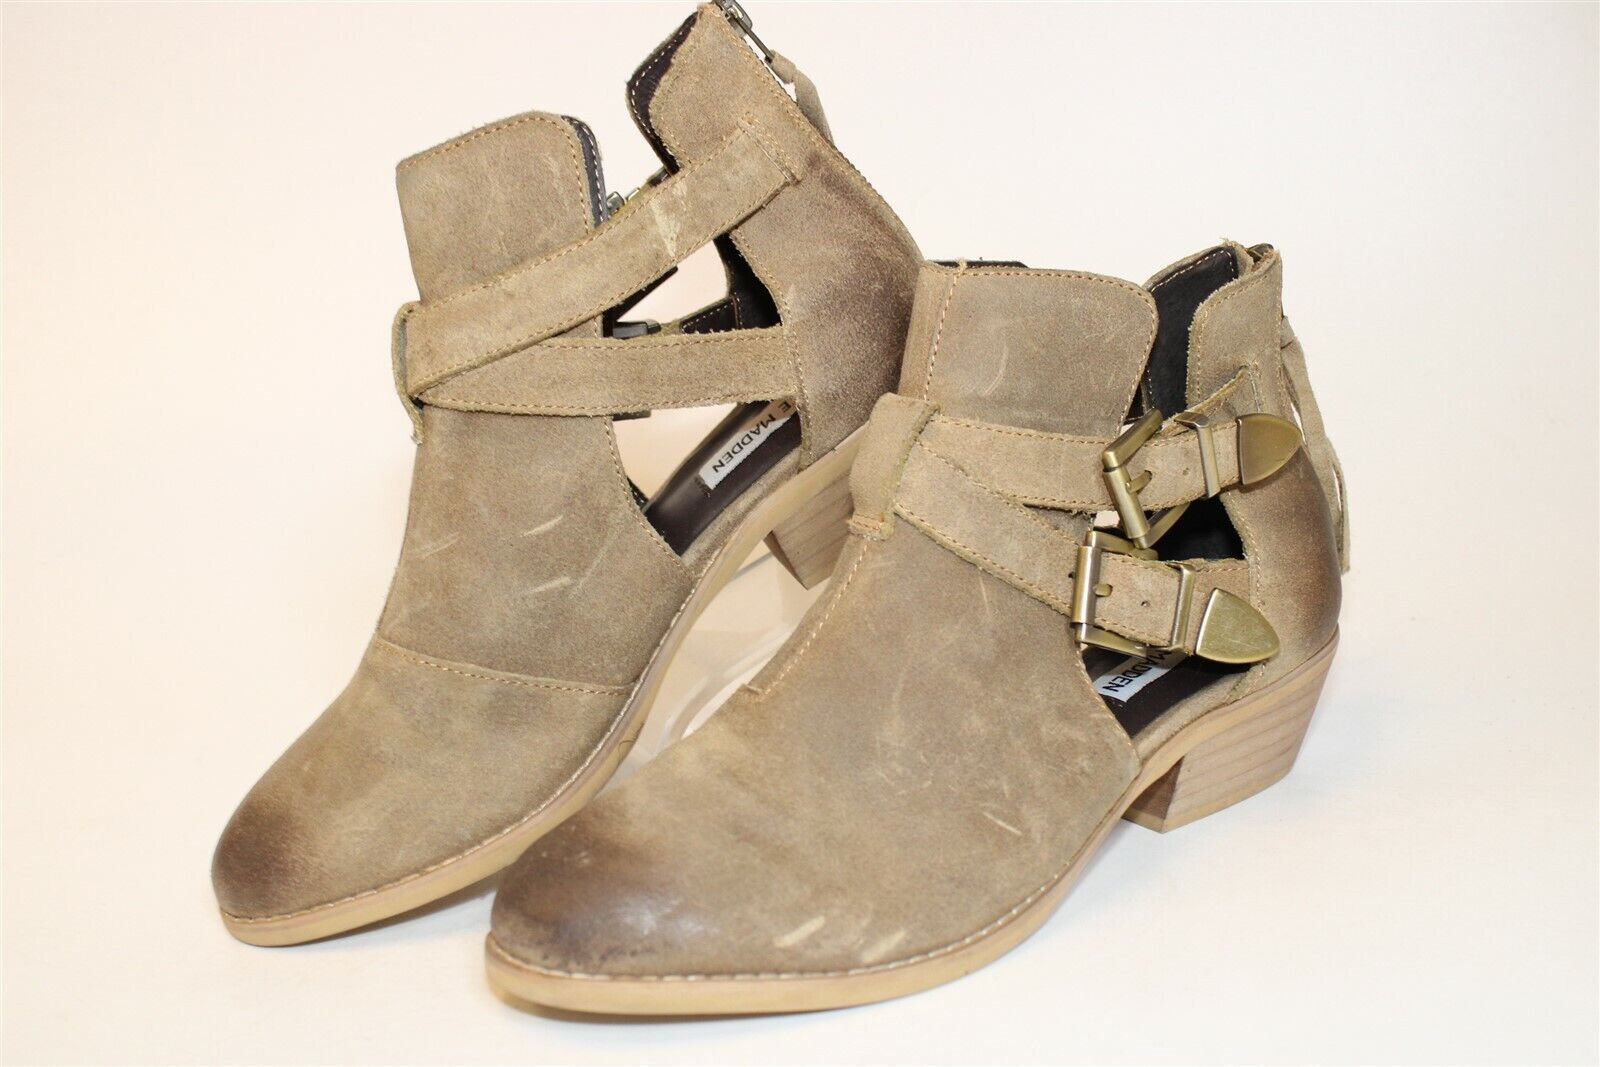 Steve Madden Cinch Womens 8.5 Brown Suede Double Buckle Booties Ankle Boots